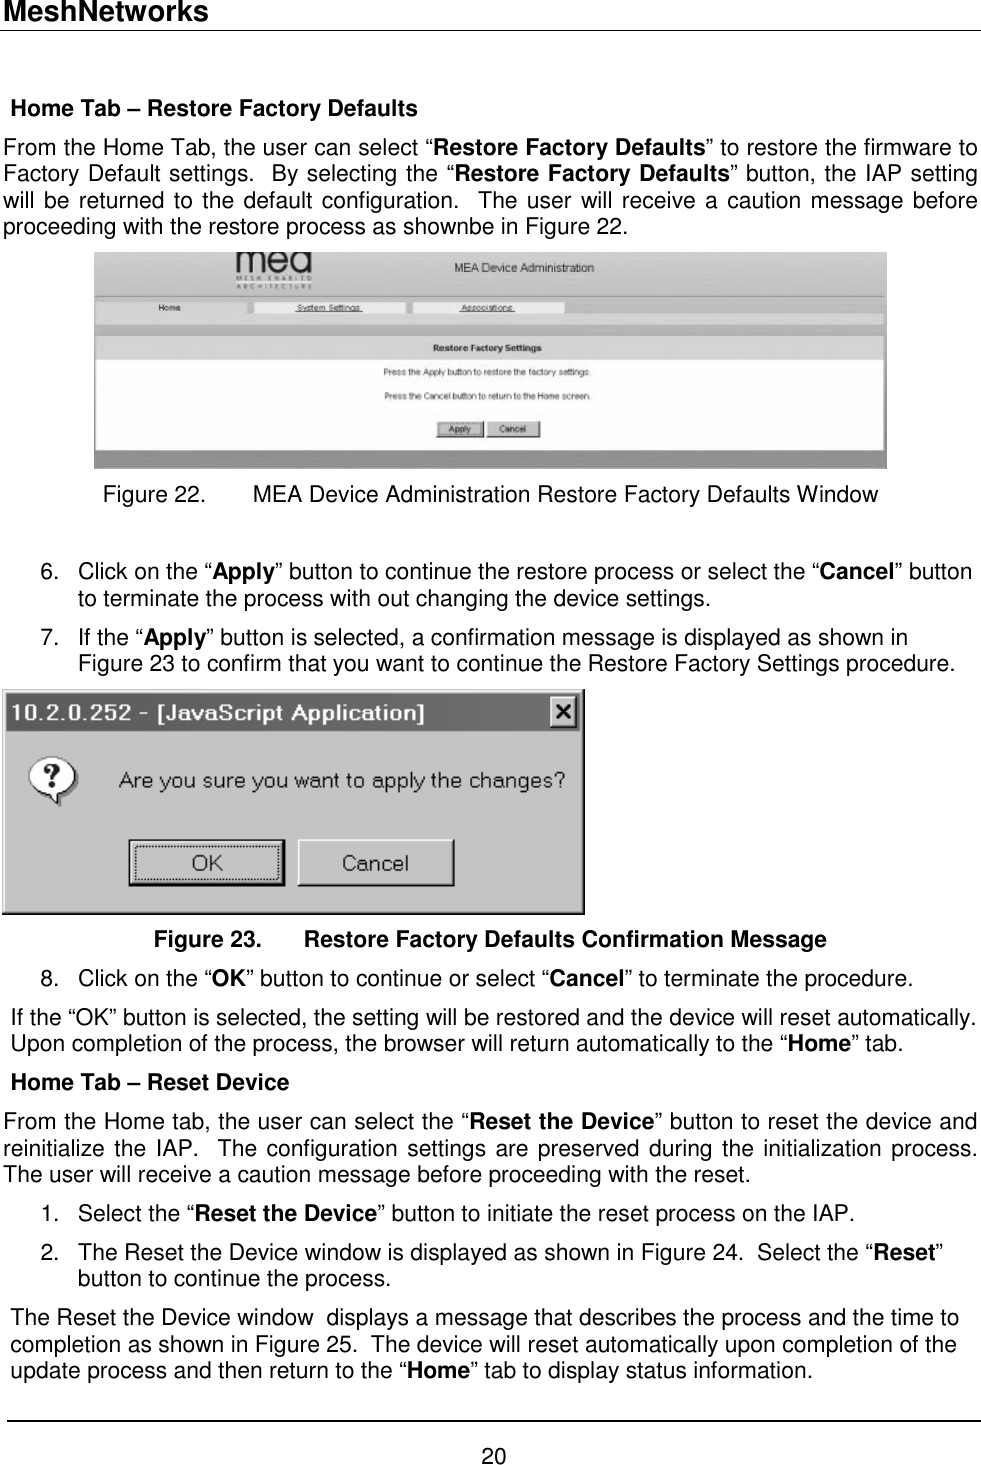 MeshNetworks 20  Home Tab – Restore Factory Defaults From the Home Tab, the user can select “Restore Factory Defaults” to restore the firmware to Factory Default settings.  By selecting the “Restore Factory Defaults” button, the IAP setting will be returned to the default configuration.  The user will receive a caution message before proceeding with the restore process as shownbe in Figure 22.  Figure 22.  MEA Device Administration Restore Factory Defaults Window  6.  Click on the “Apply” button to continue the restore process or select the “Cancel” button to terminate the process with out changing the device settings. 7.  If the “Apply” button is selected, a confirmation message is displayed as shown in Figure 23 to confirm that you want to continue the Restore Factory Settings procedure.    Figure 23.  Restore Factory Defaults Confirmation Message 8.  Click on the “OK” button to continue or select “Cancel” to terminate the procedure.   If the “OK” button is selected, the setting will be restored and the device will reset automatically.  Upon completion of the process, the browser will return automatically to the “Home” tab. Home Tab – Reset Device From the Home tab, the user can select the “Reset the Device” button to reset the device and reinitialize the IAP.  The configuration settings are preserved during the initialization process.  The user will receive a caution message before proceeding with the reset. 1.  Select the “Reset the Device” button to initiate the reset process on the IAP.   2.  The Reset the Device window is displayed as shown in Figure 24.  Select the “Reset” button to continue the process. The Reset the Device window  displays a message that describes the process and the time to completion as shown in Figure 25.  The device will reset automatically upon completion of the update process and then return to the “Home” tab to display status information. 